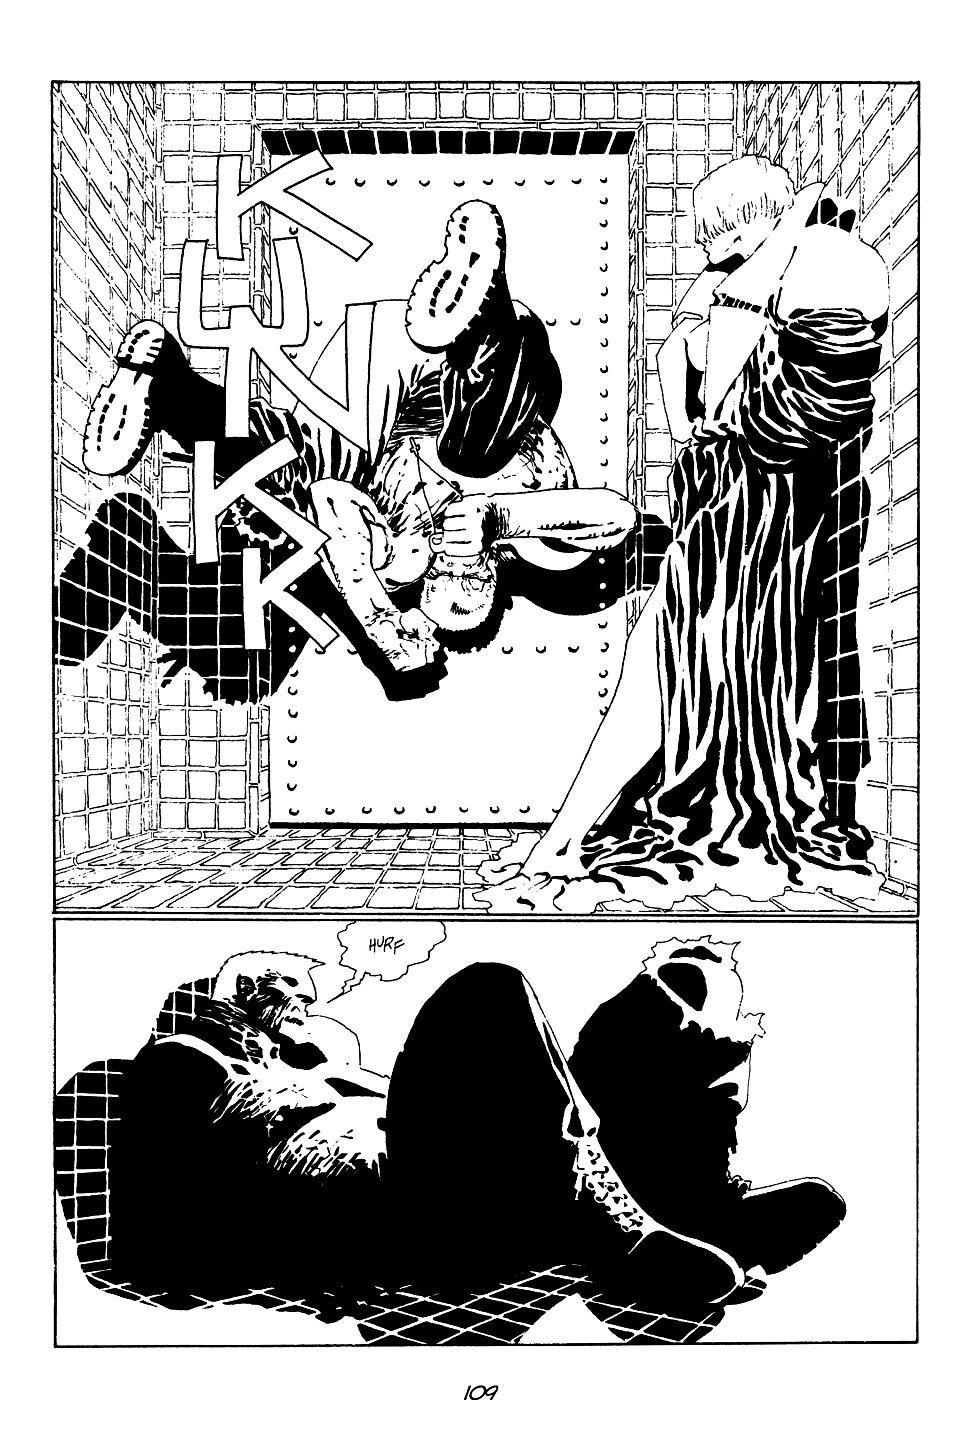 page 109 of sin city 1 the hard goodbye